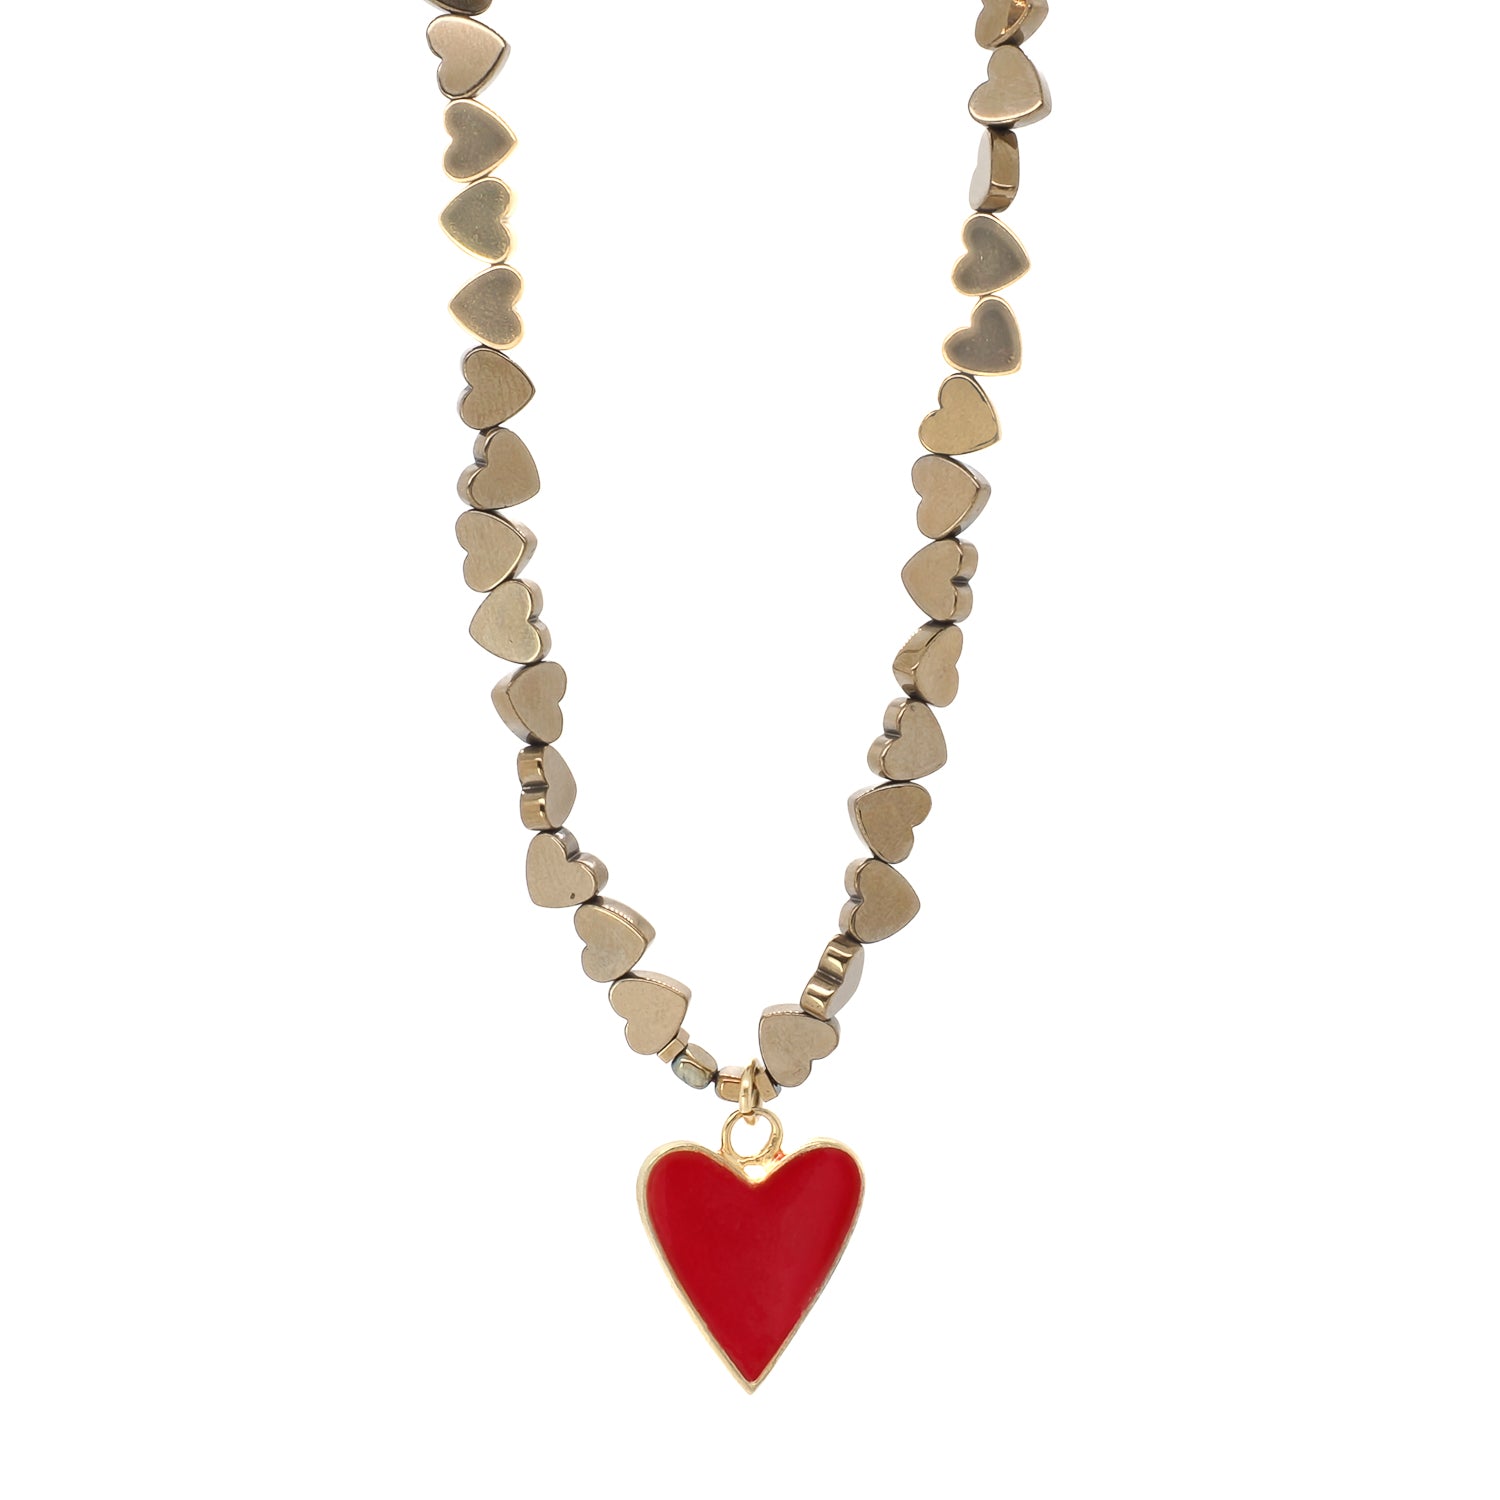 A stylish necklace that combines hematite beads and a sterling silver gold plated heart charm with red enamel.